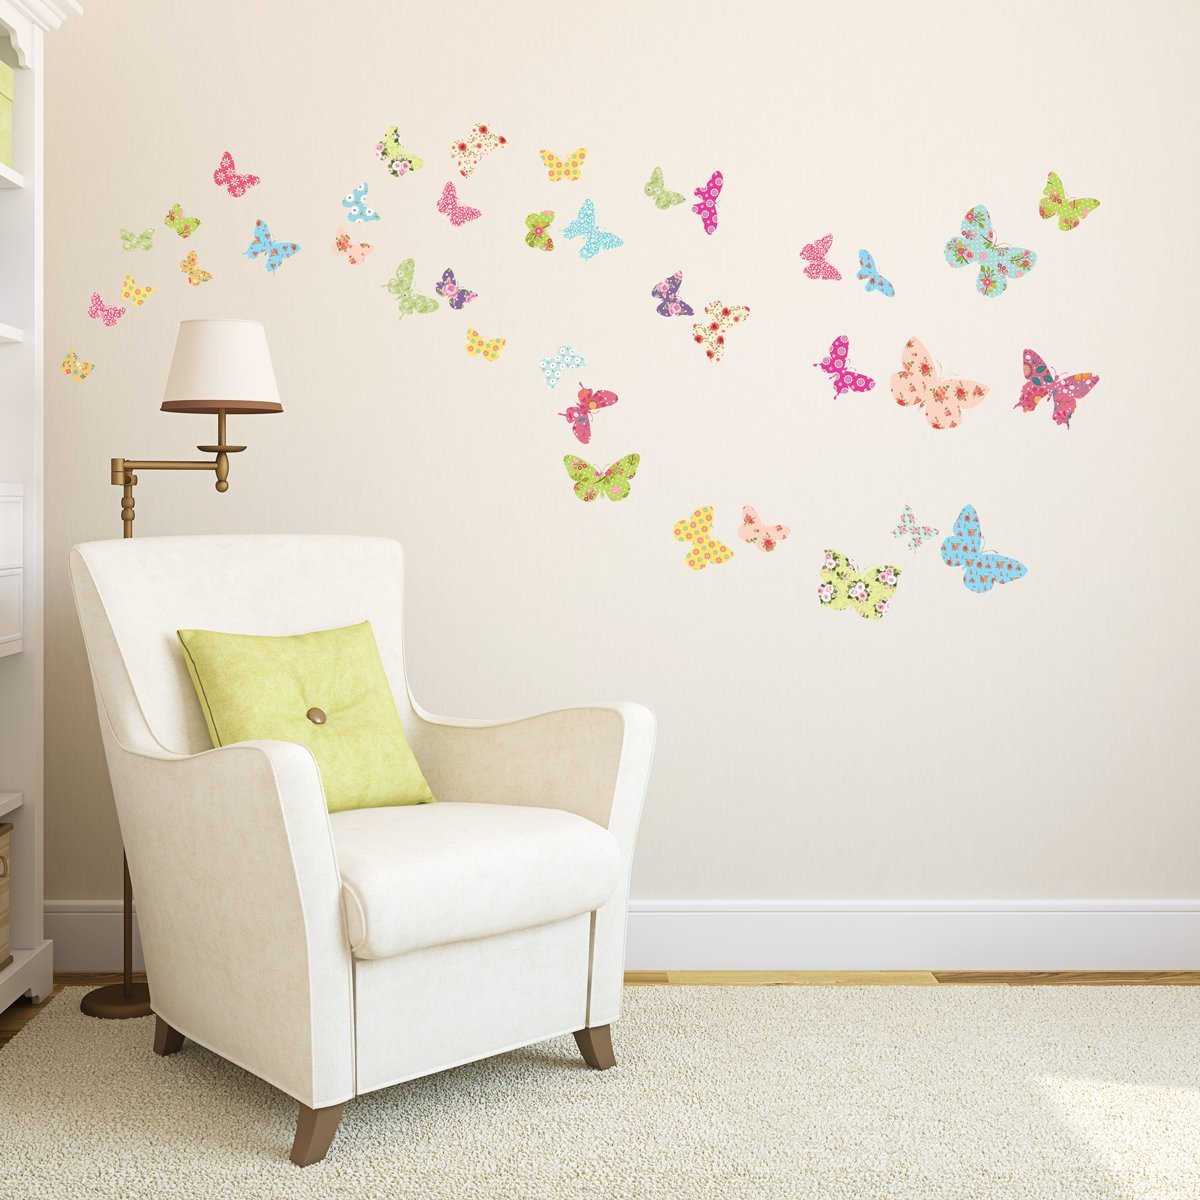 Decowall DW-1408 Patterned Butterflies Kids Wall Decals Wall Stickers Peel and Stick Removable Wall Stickers for Kids Nursery Bedroom...